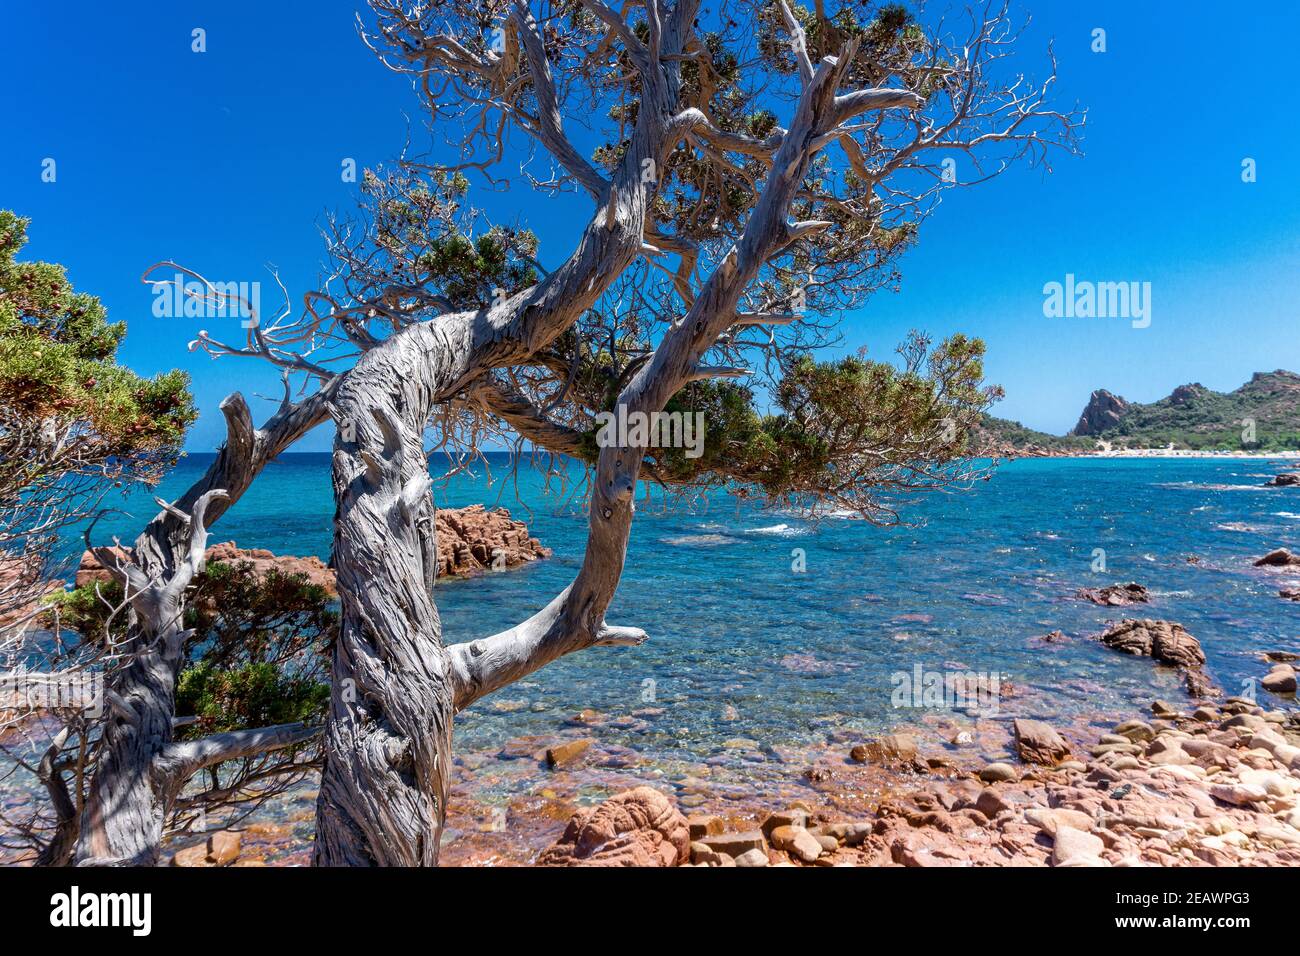 Red rocks, crystal clear water and centuries-old junipers on the beach of Su Sirboni, Sardinia Stock Photo